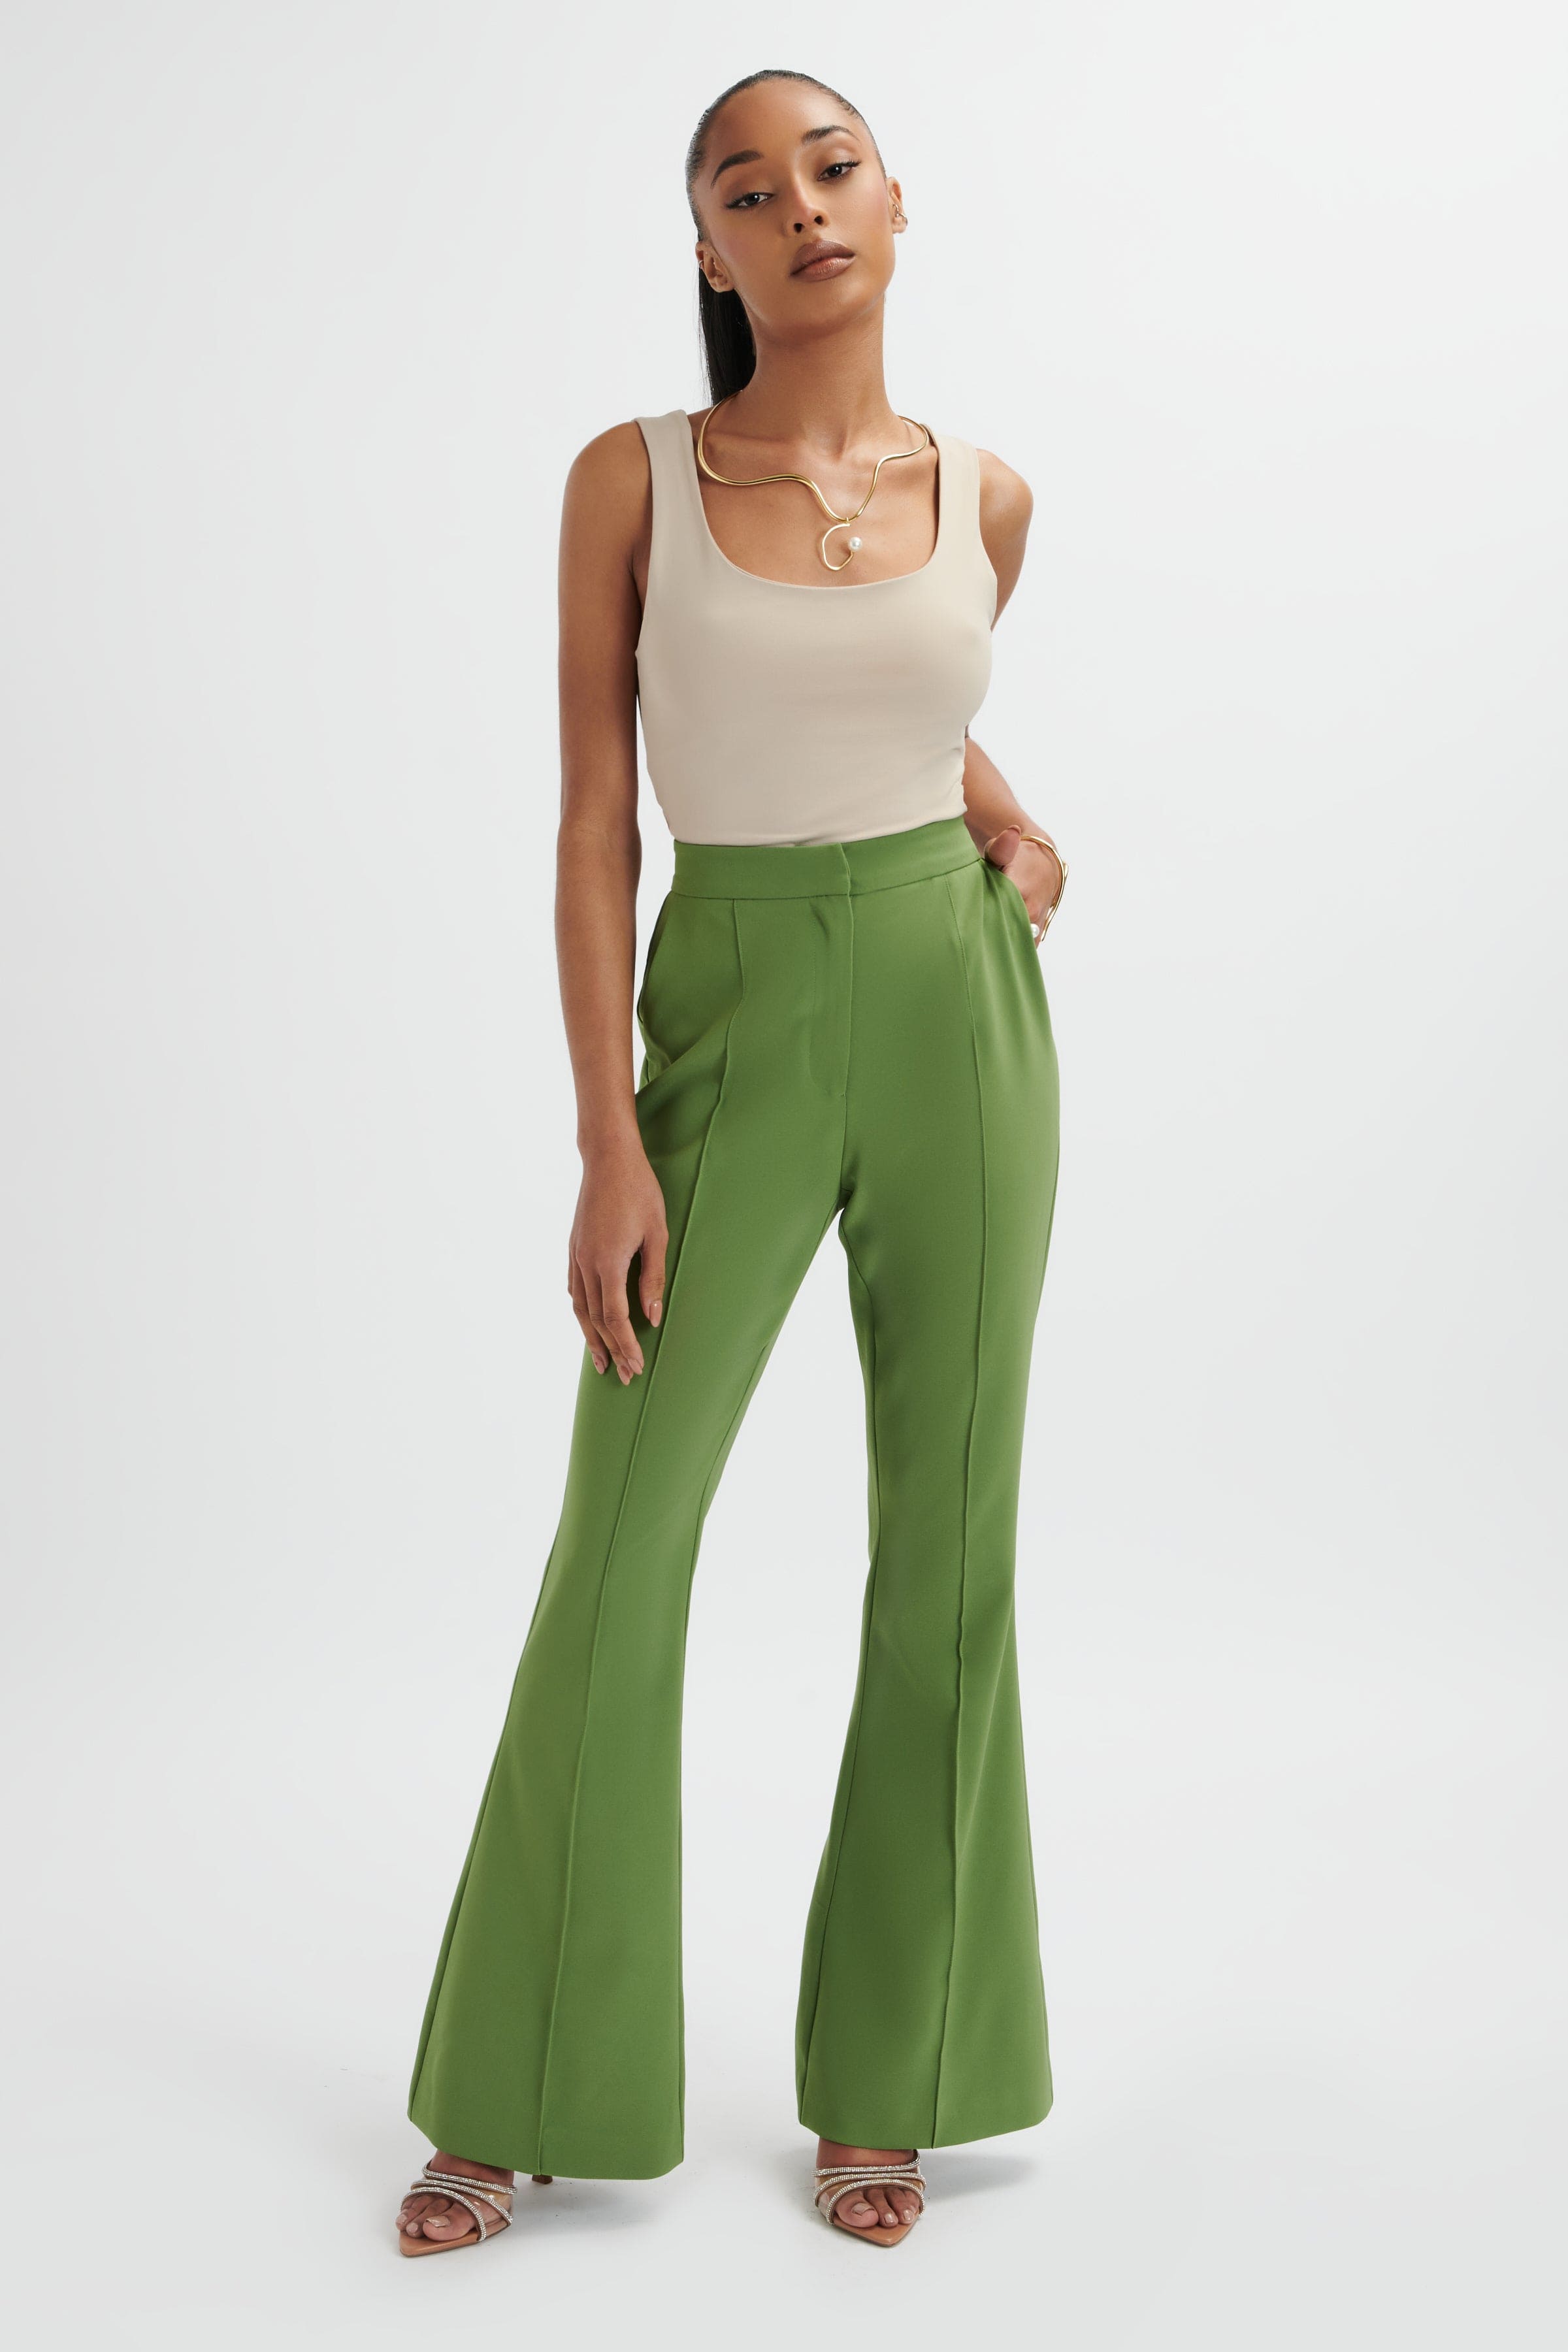 Womens Trousers | High Waist, Tailored & Leather Trousers | UK